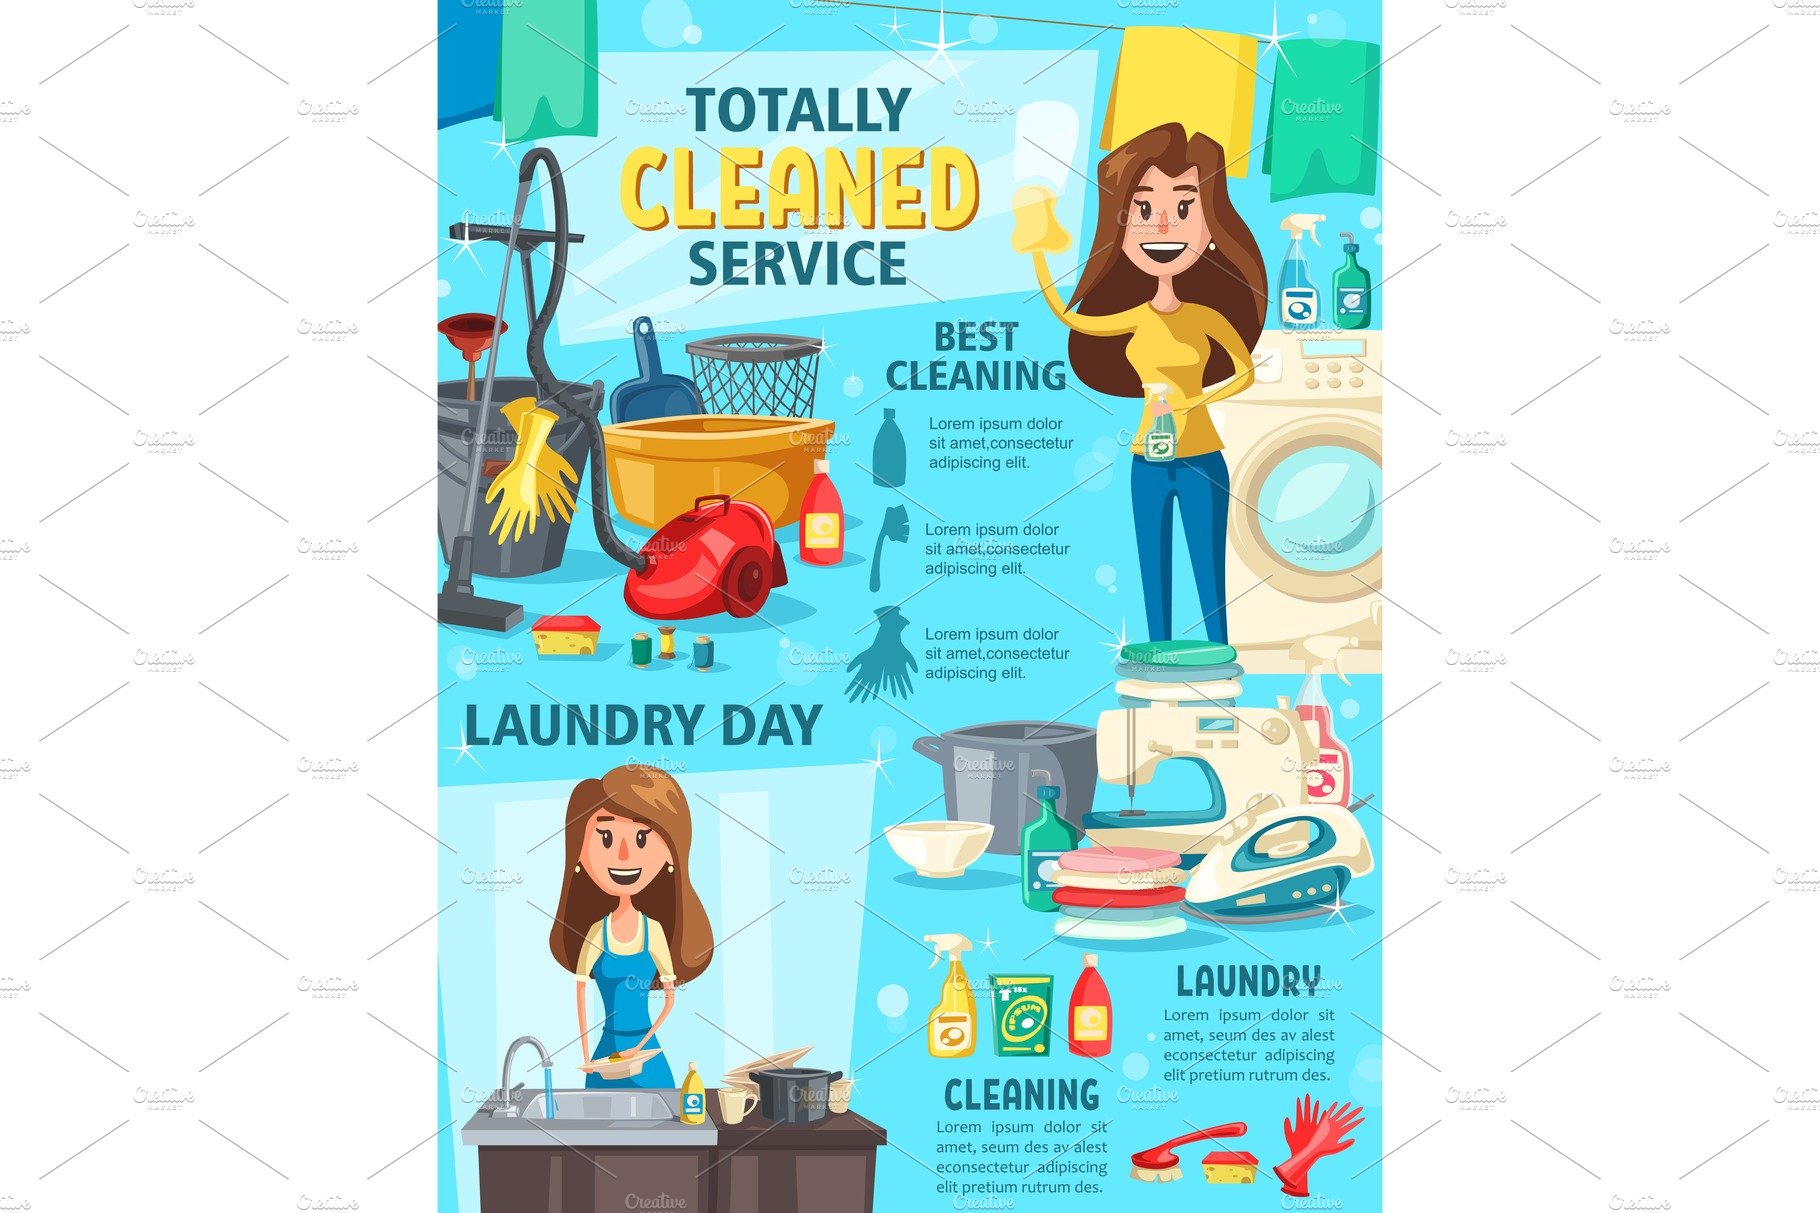 House cleaning service, washing cover image.